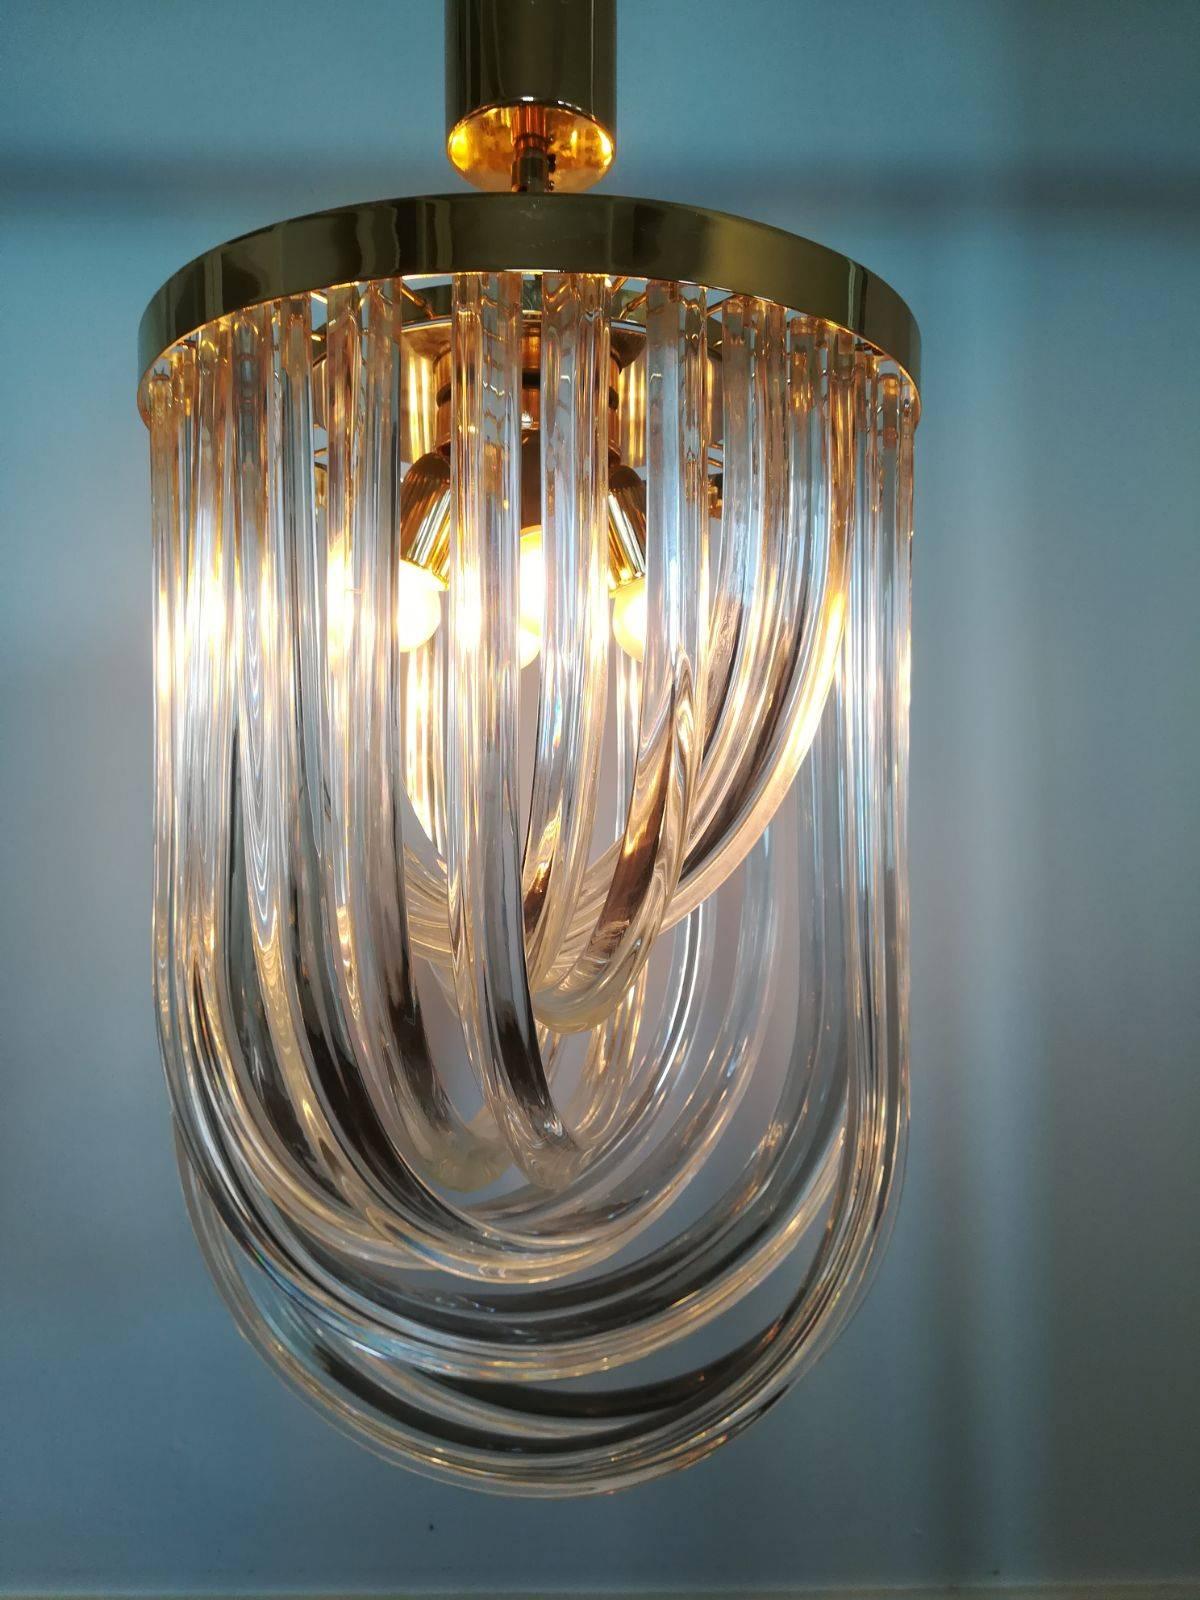 Italian Mid-Century Modern Venini Curved Crystal Clear Murano Glass Chandelier, 1960s For Sale